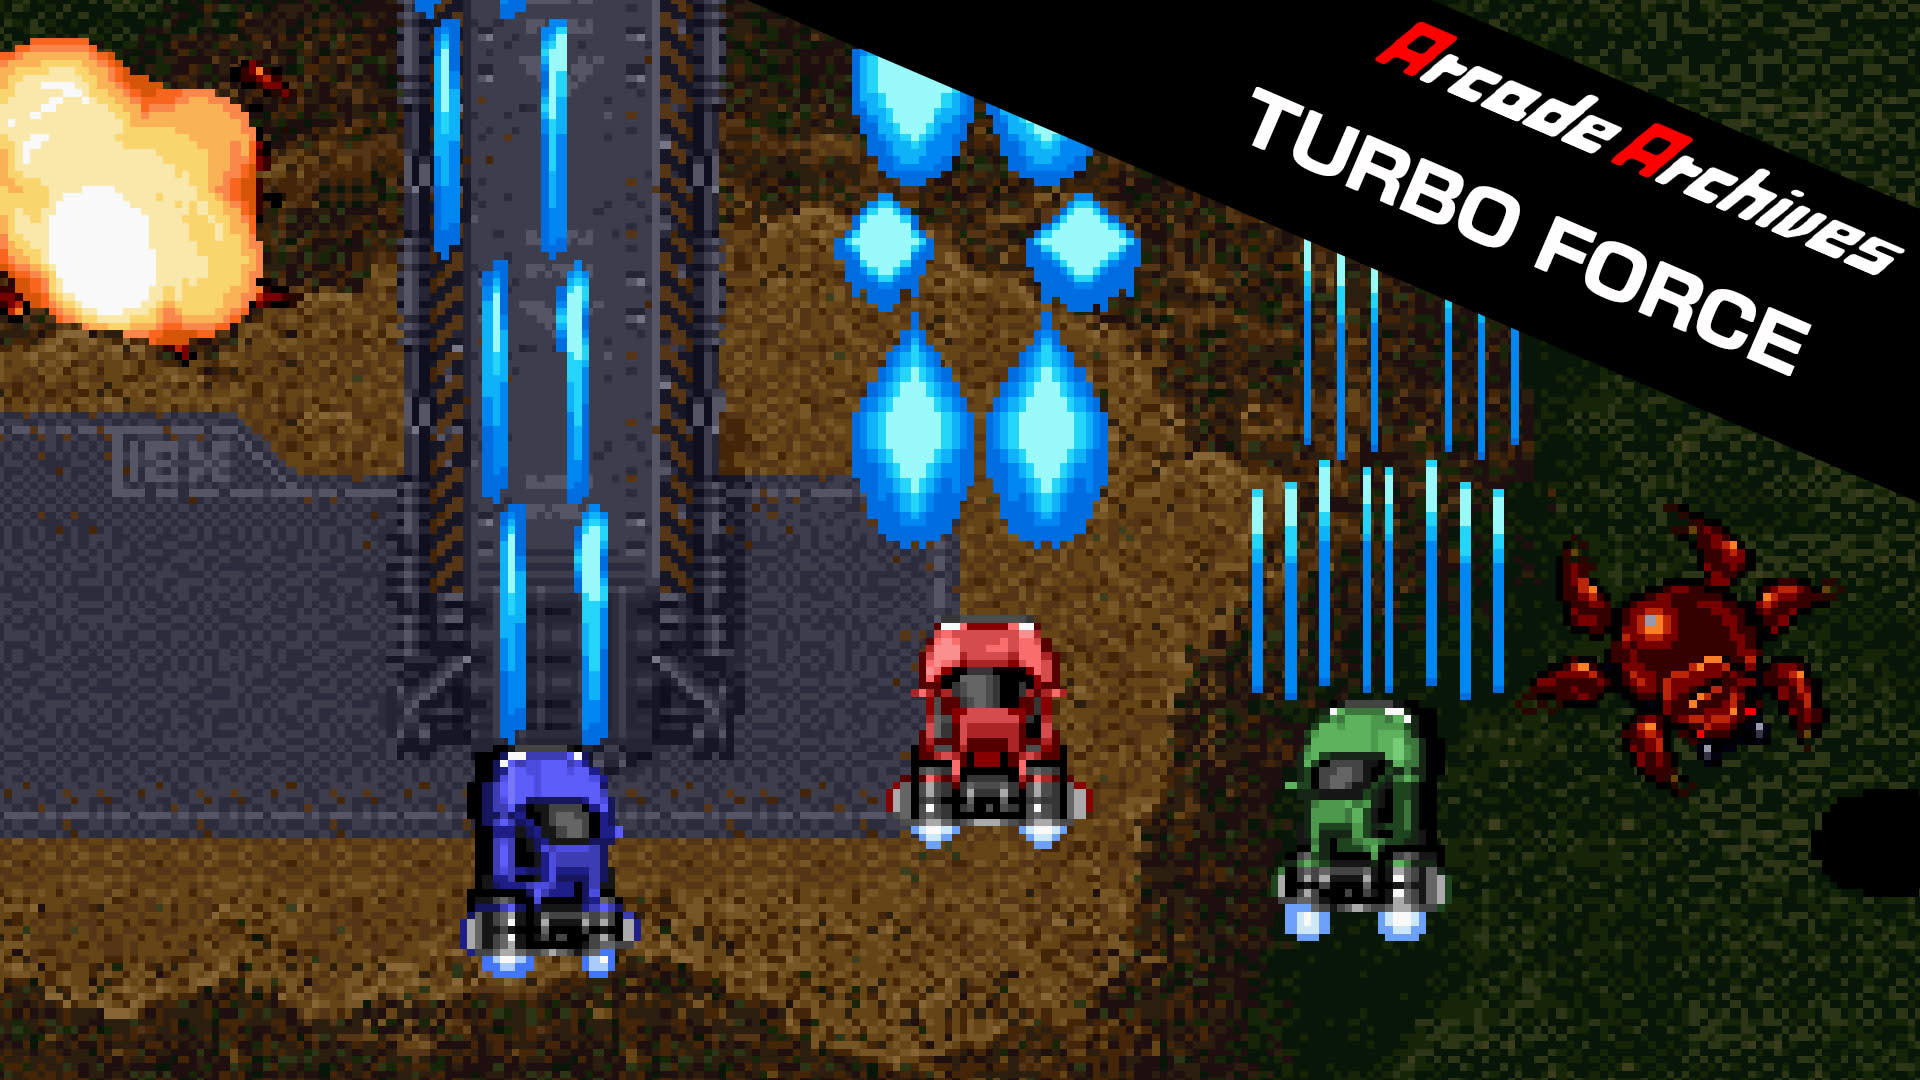 Arcade Archives TURBO FORCE